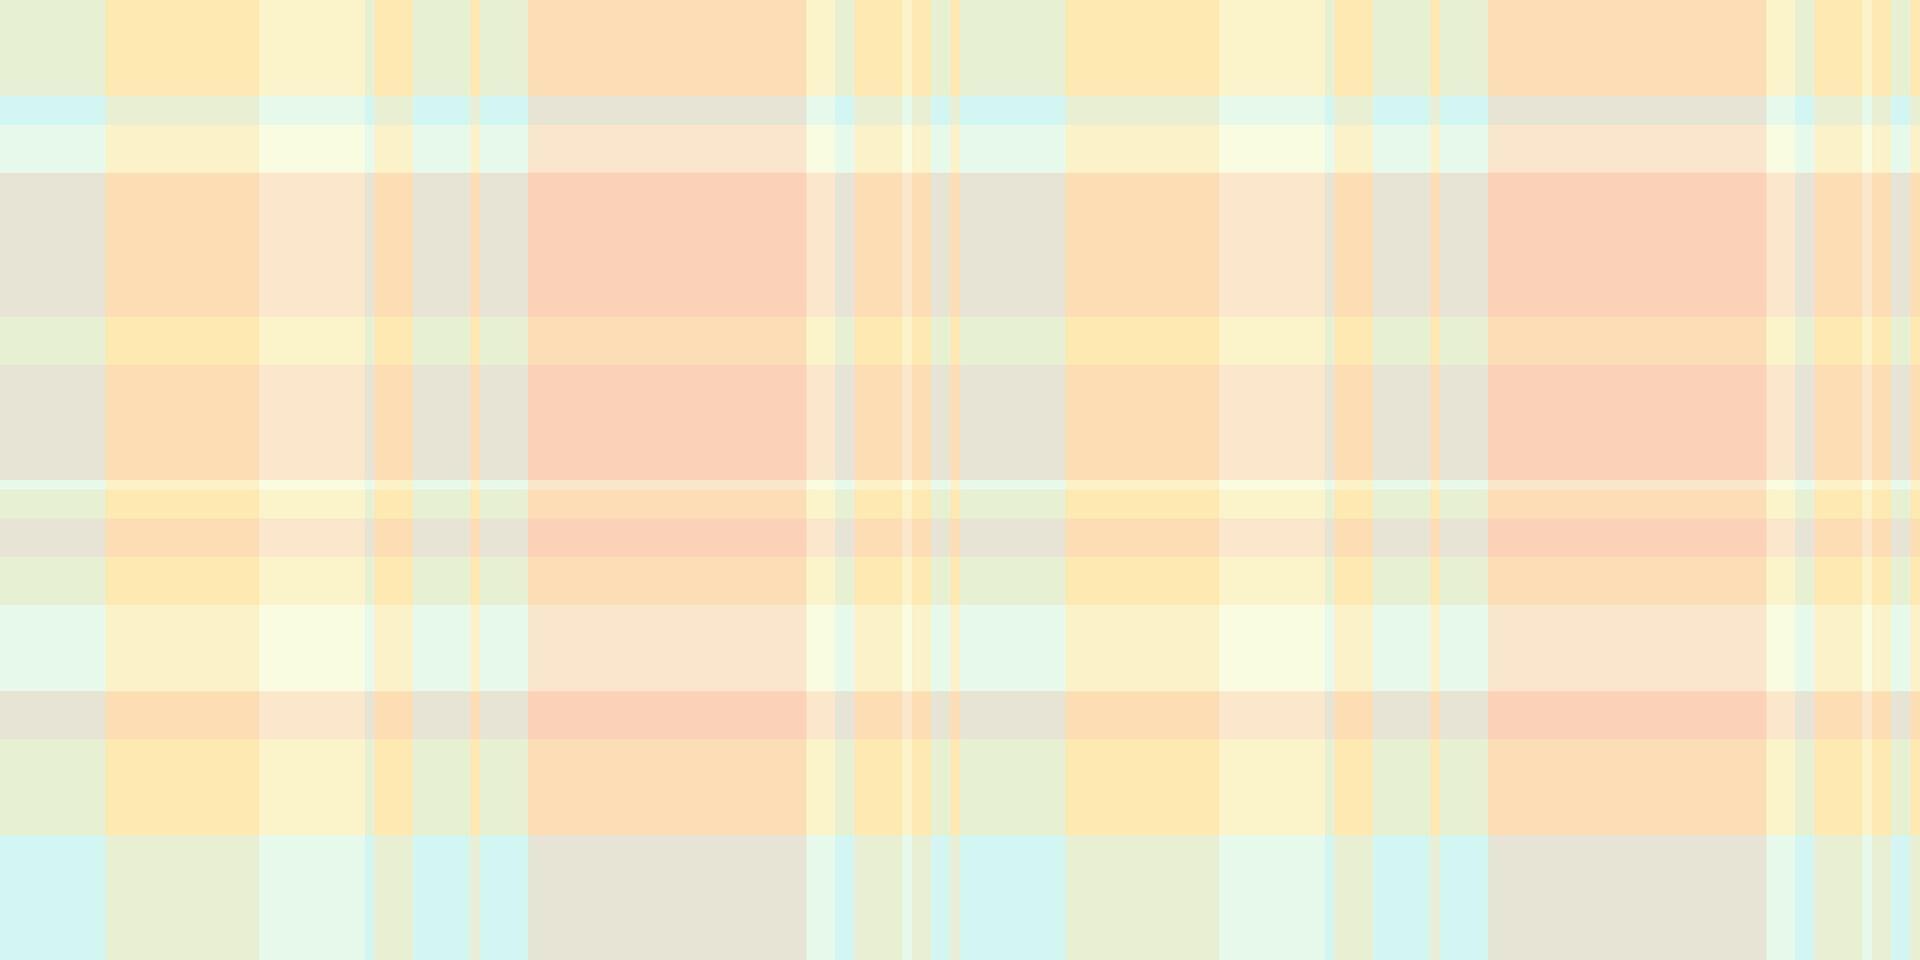 Intricate tartan seamless pattern, nyc background check vector. Xmas plaid textile fabric texture in light and white colors. vector